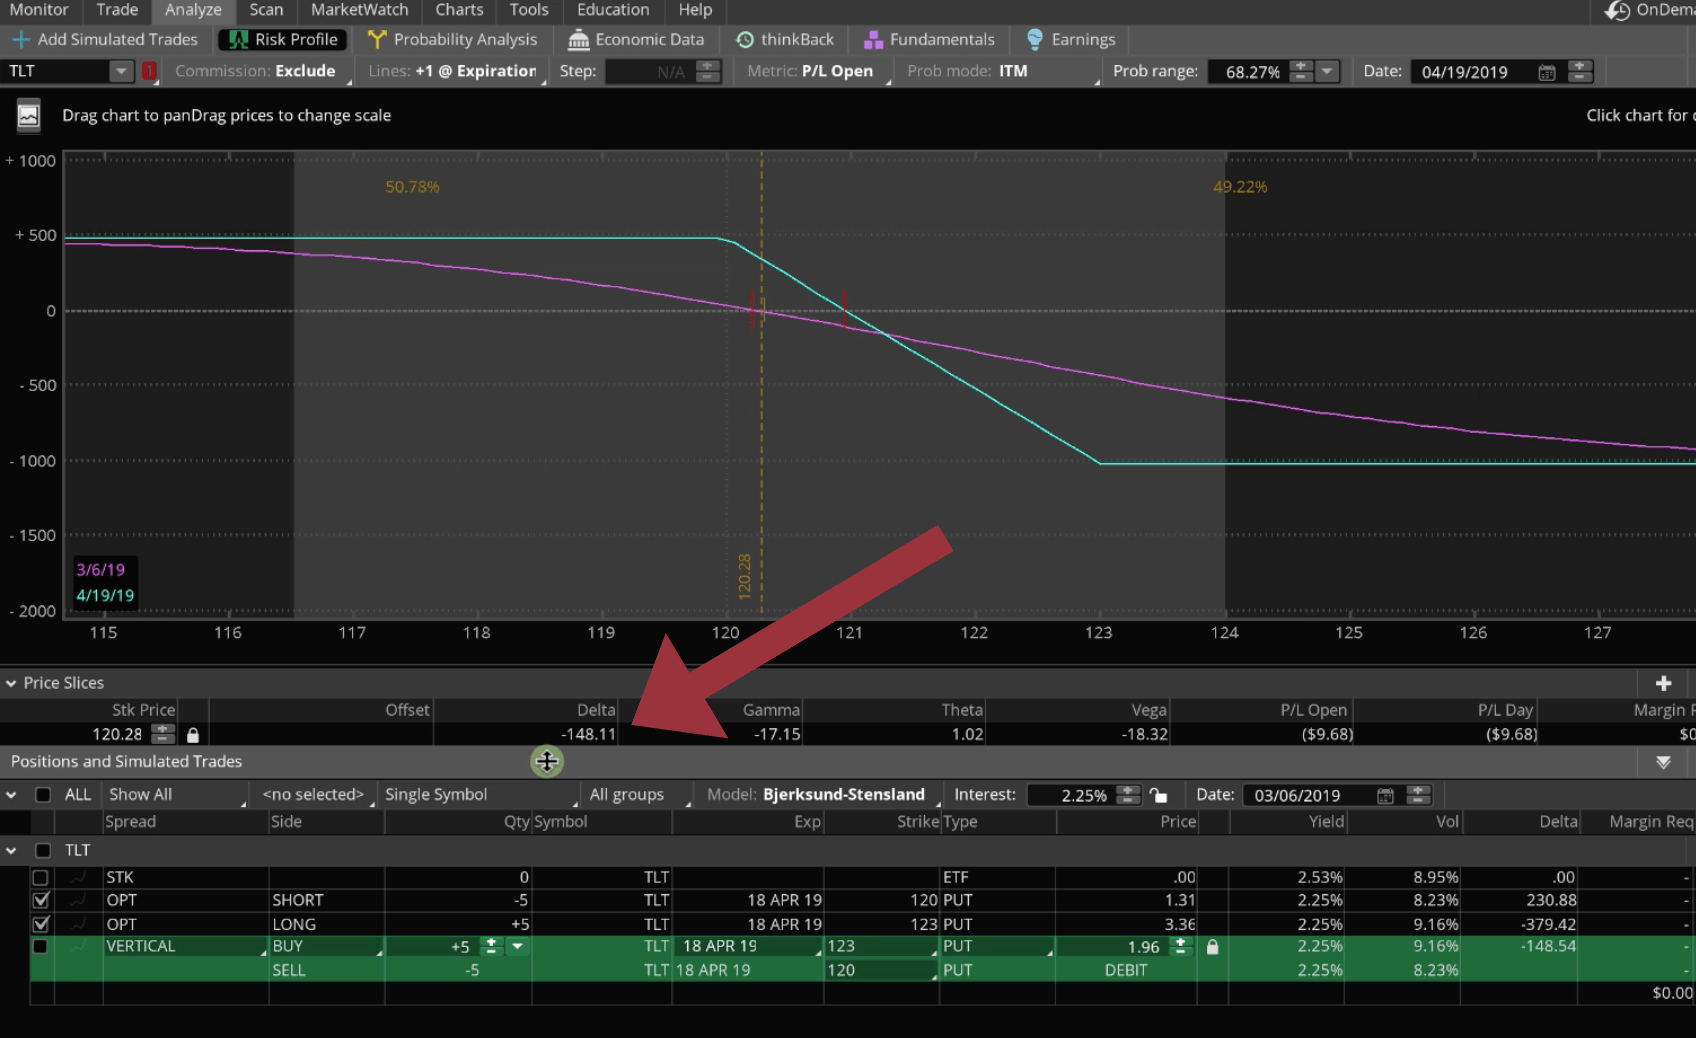 TLT in the Analyze Tab, not beta weighted yet